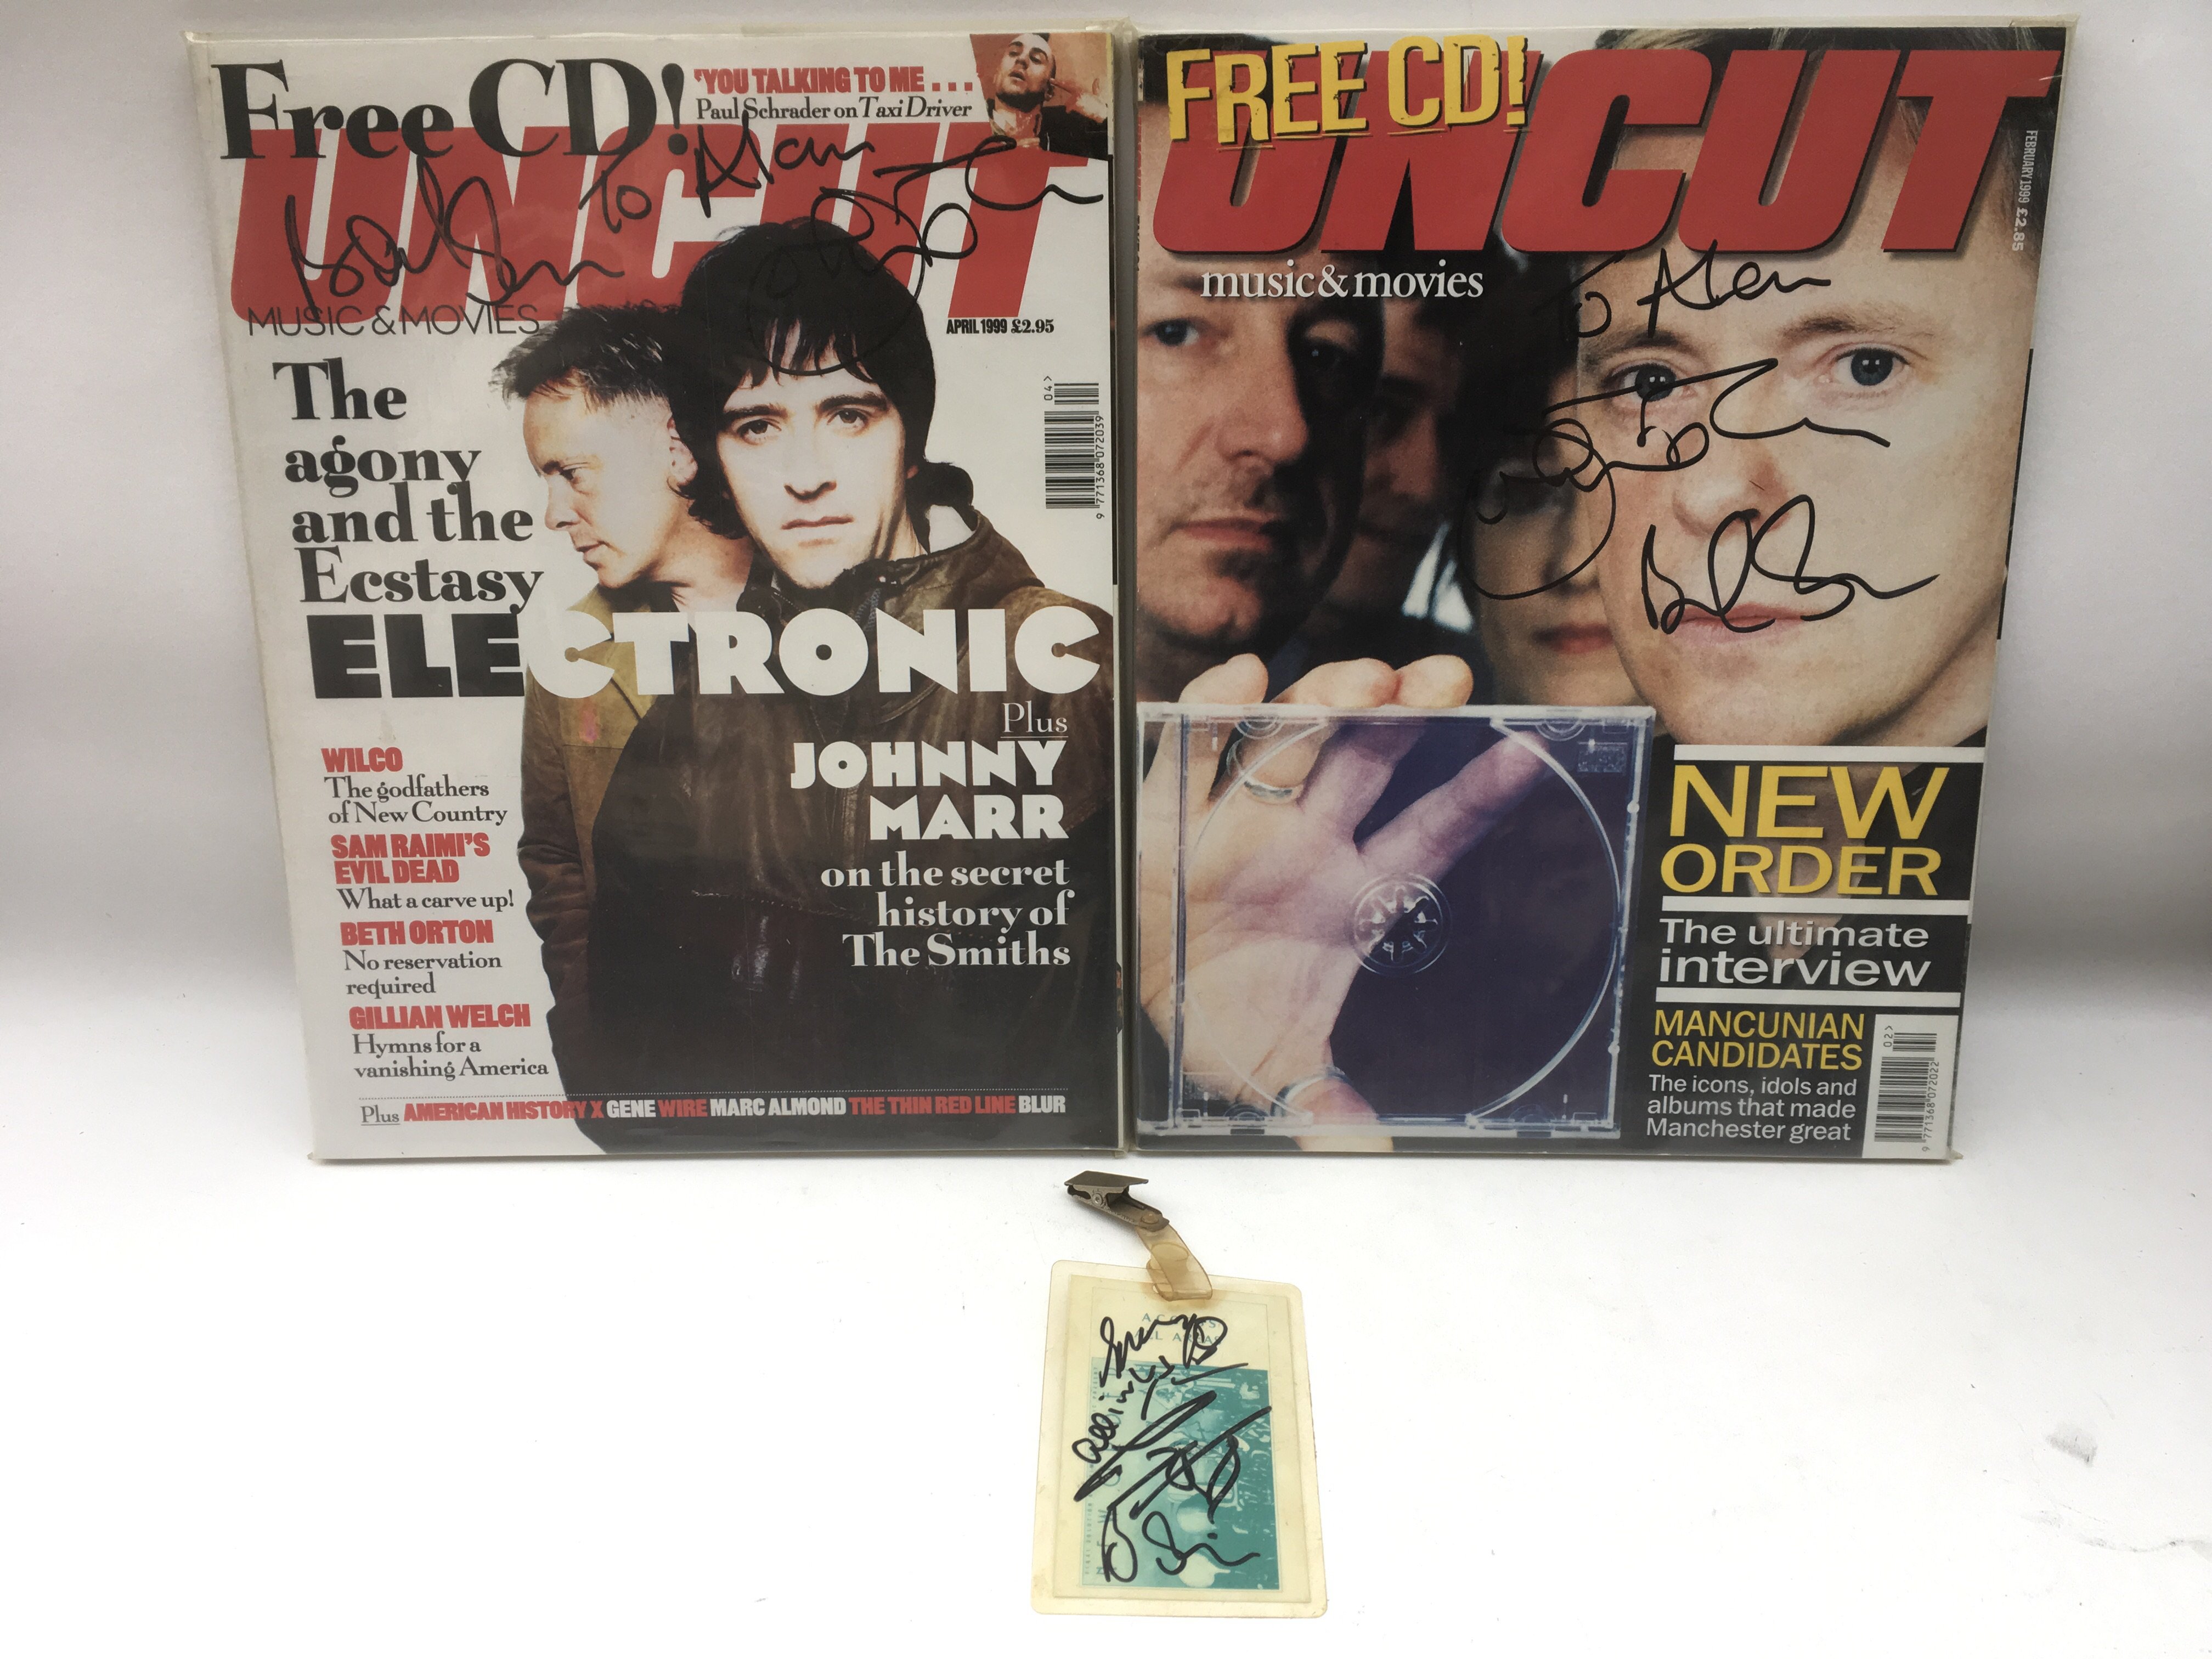 A signed New Order tour laminate plus two issues of Uncut signed by Bernard Sumner and Johnny Marr